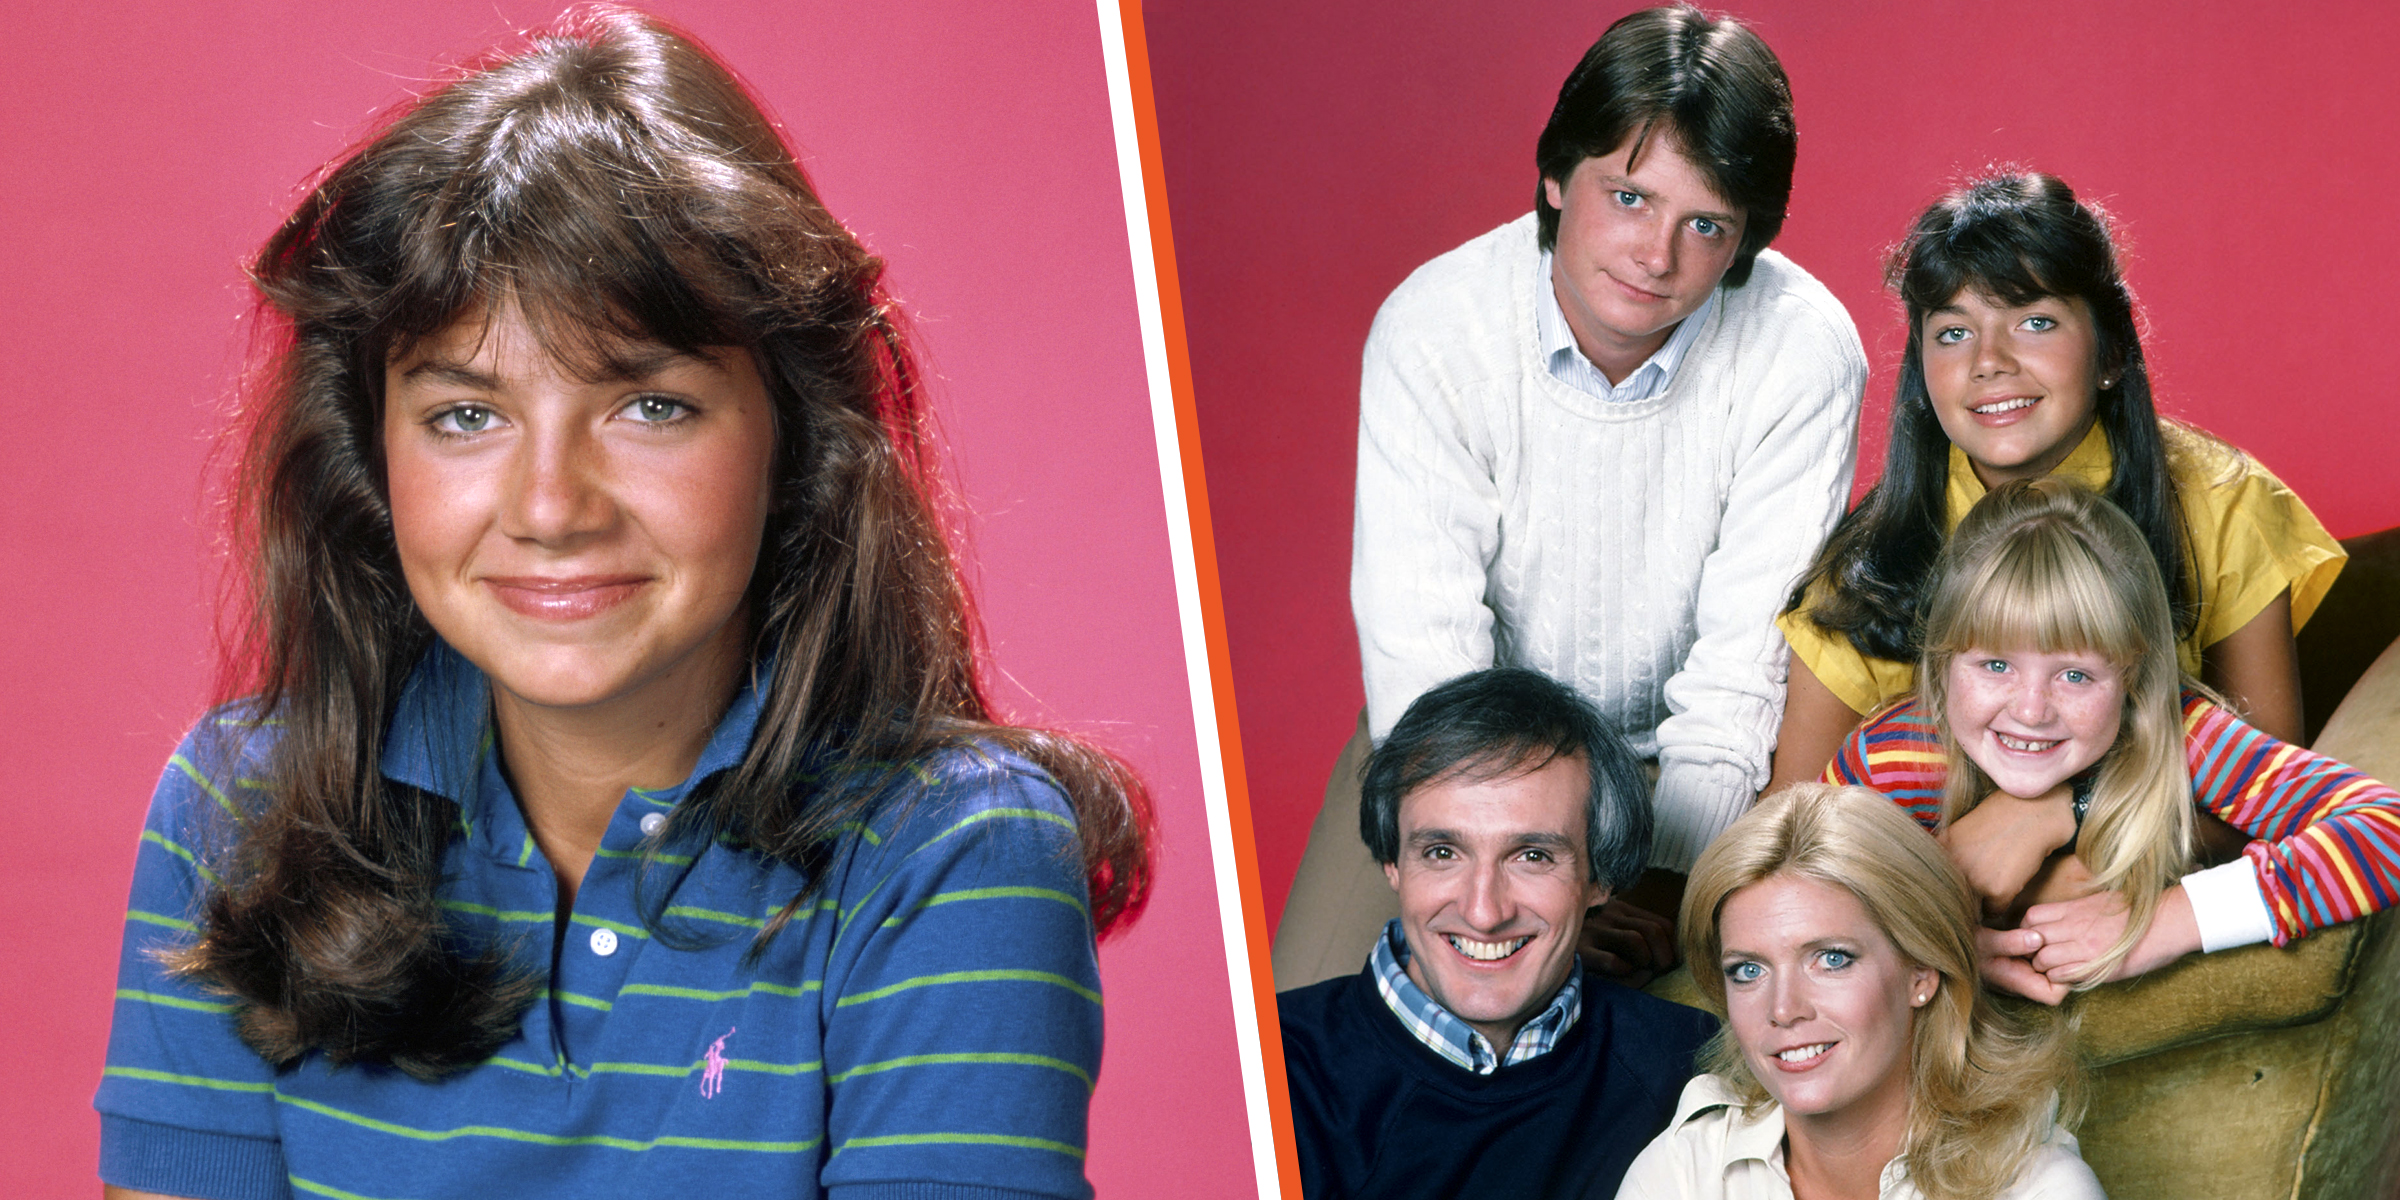 Justine Bateman | The cast of 'Family Ties' | Source: Getty Images